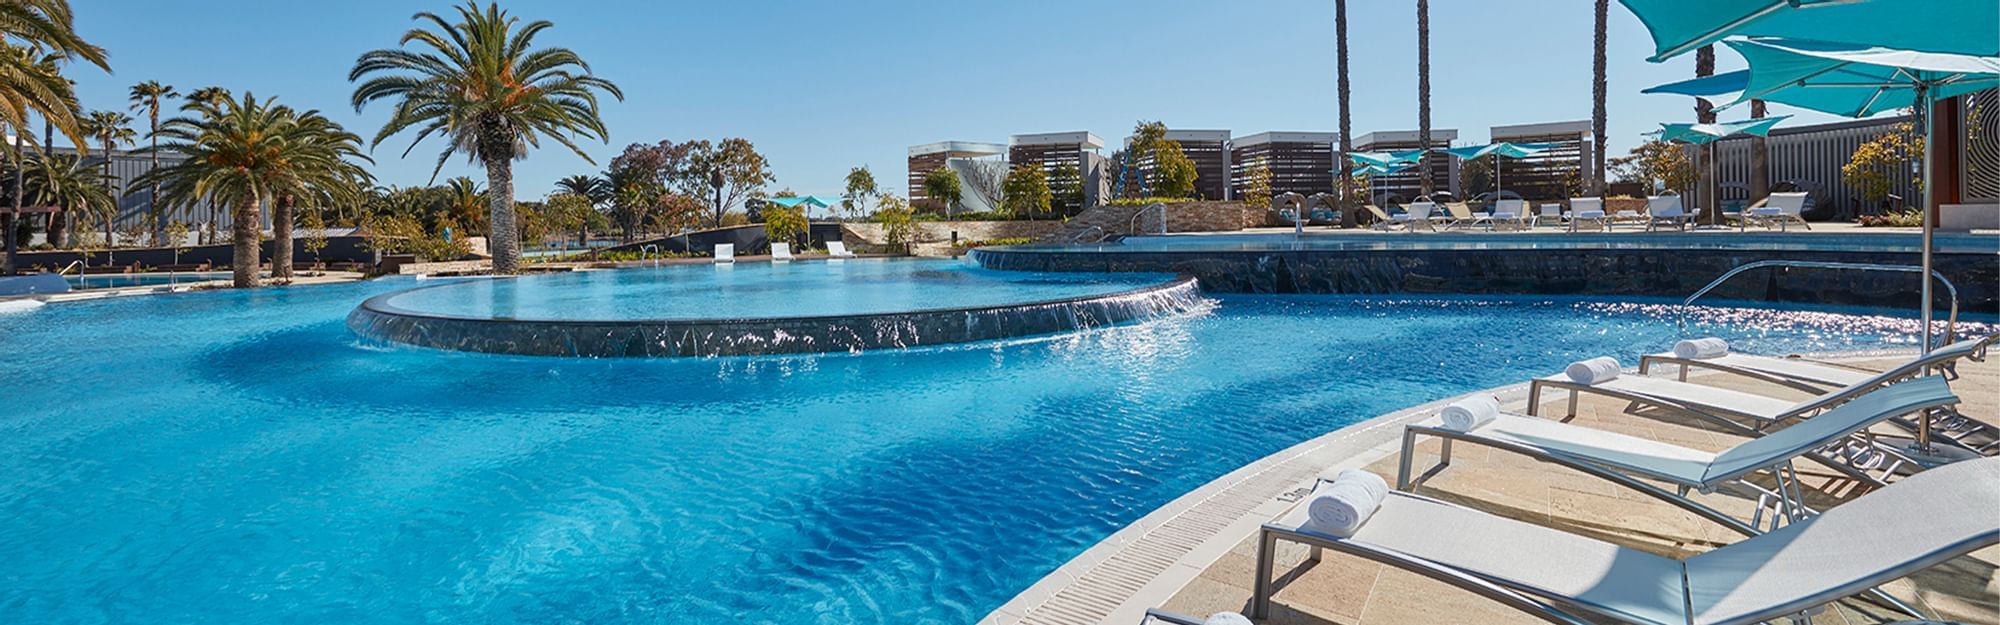 Swimming pool with sun loungers at Crown Towers Perth